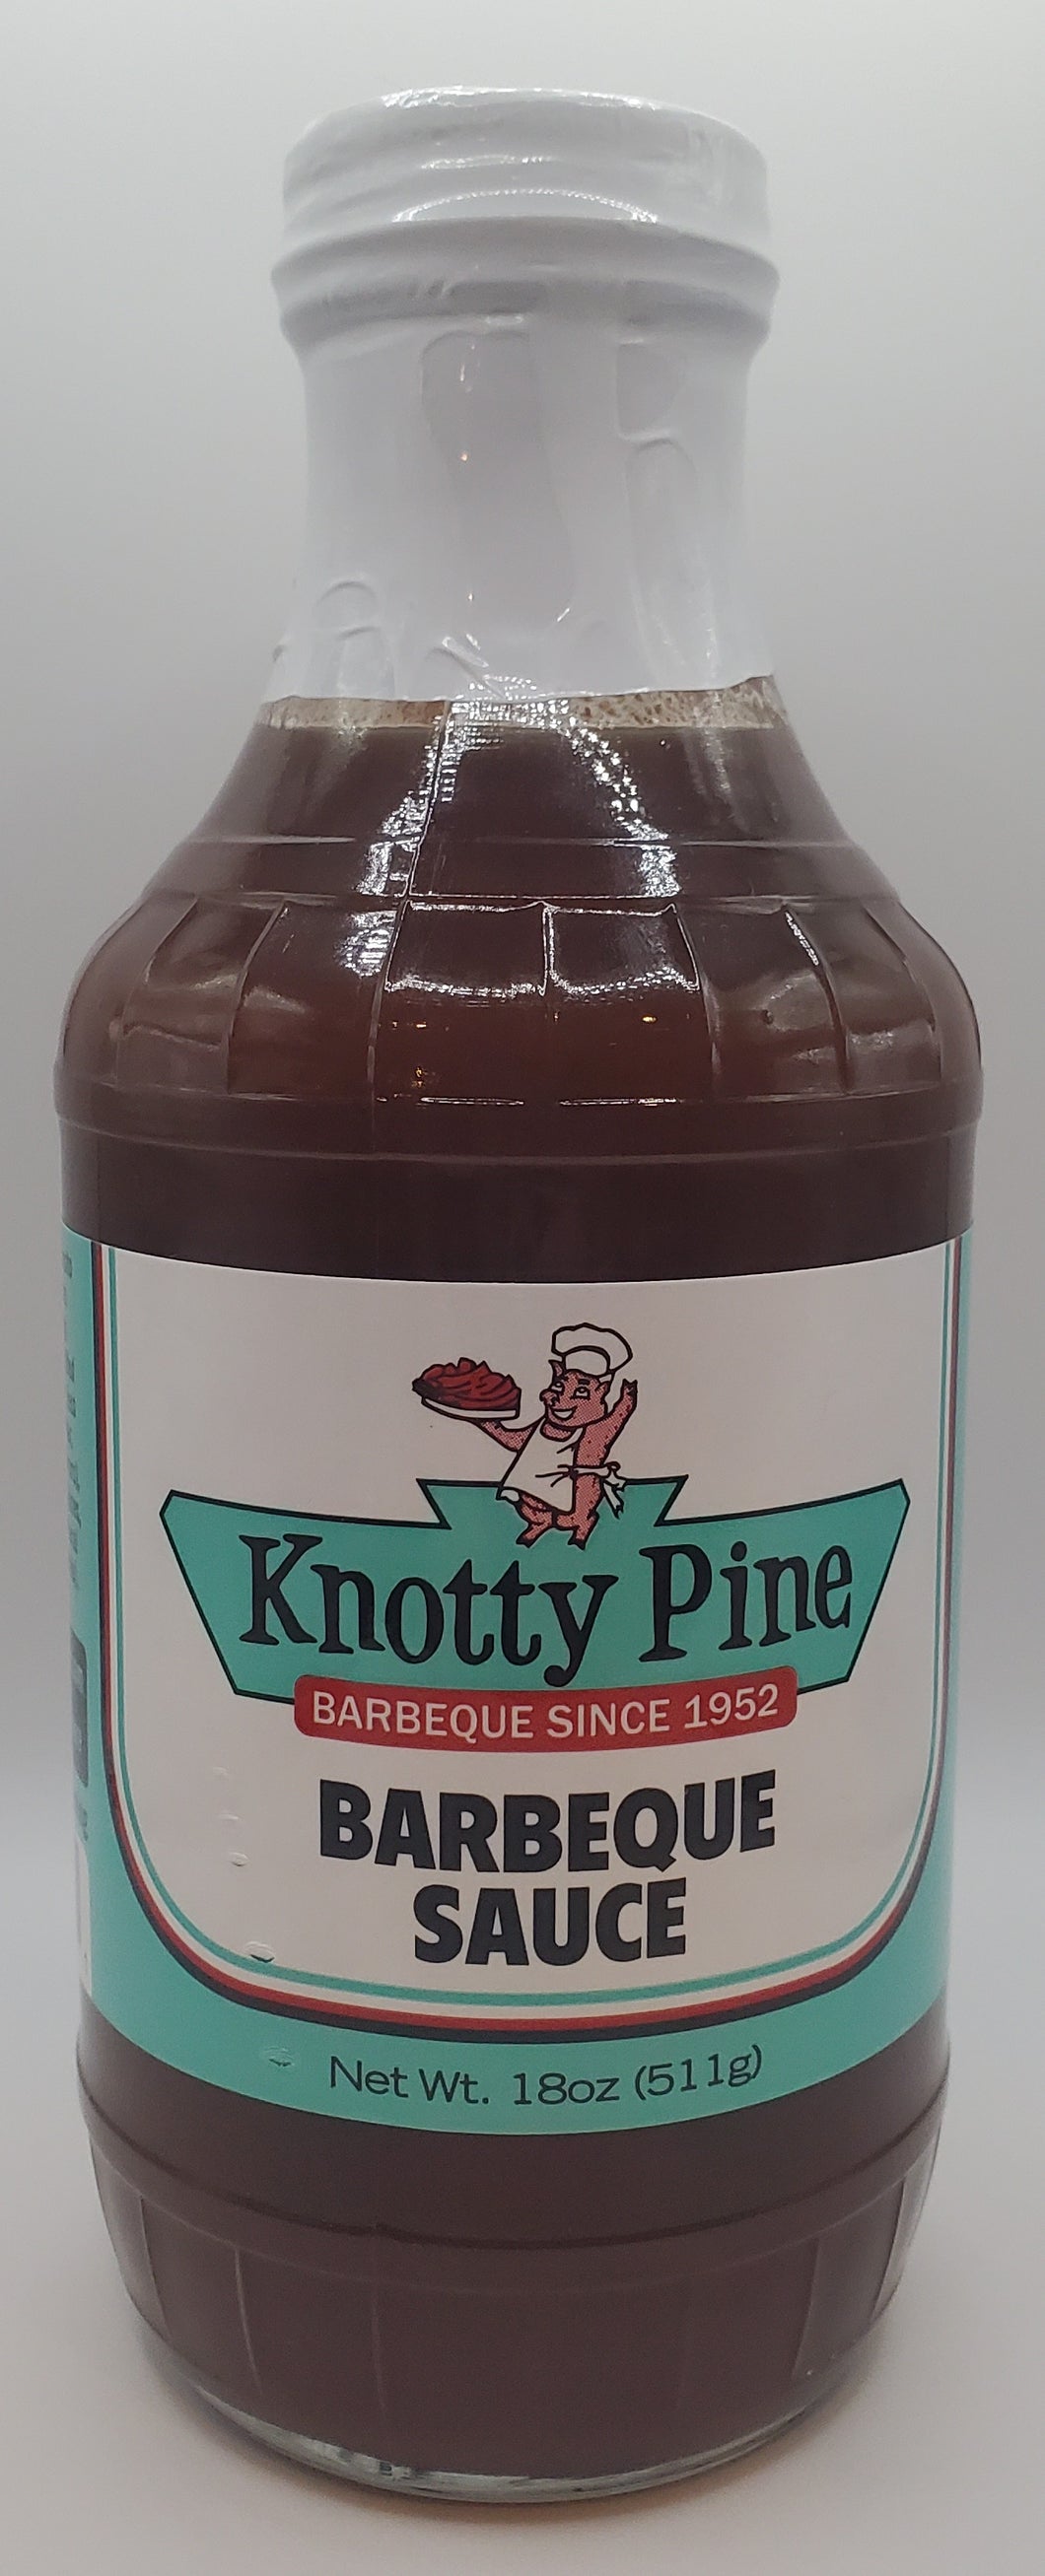 Knotty Pine Barbeque Sauce